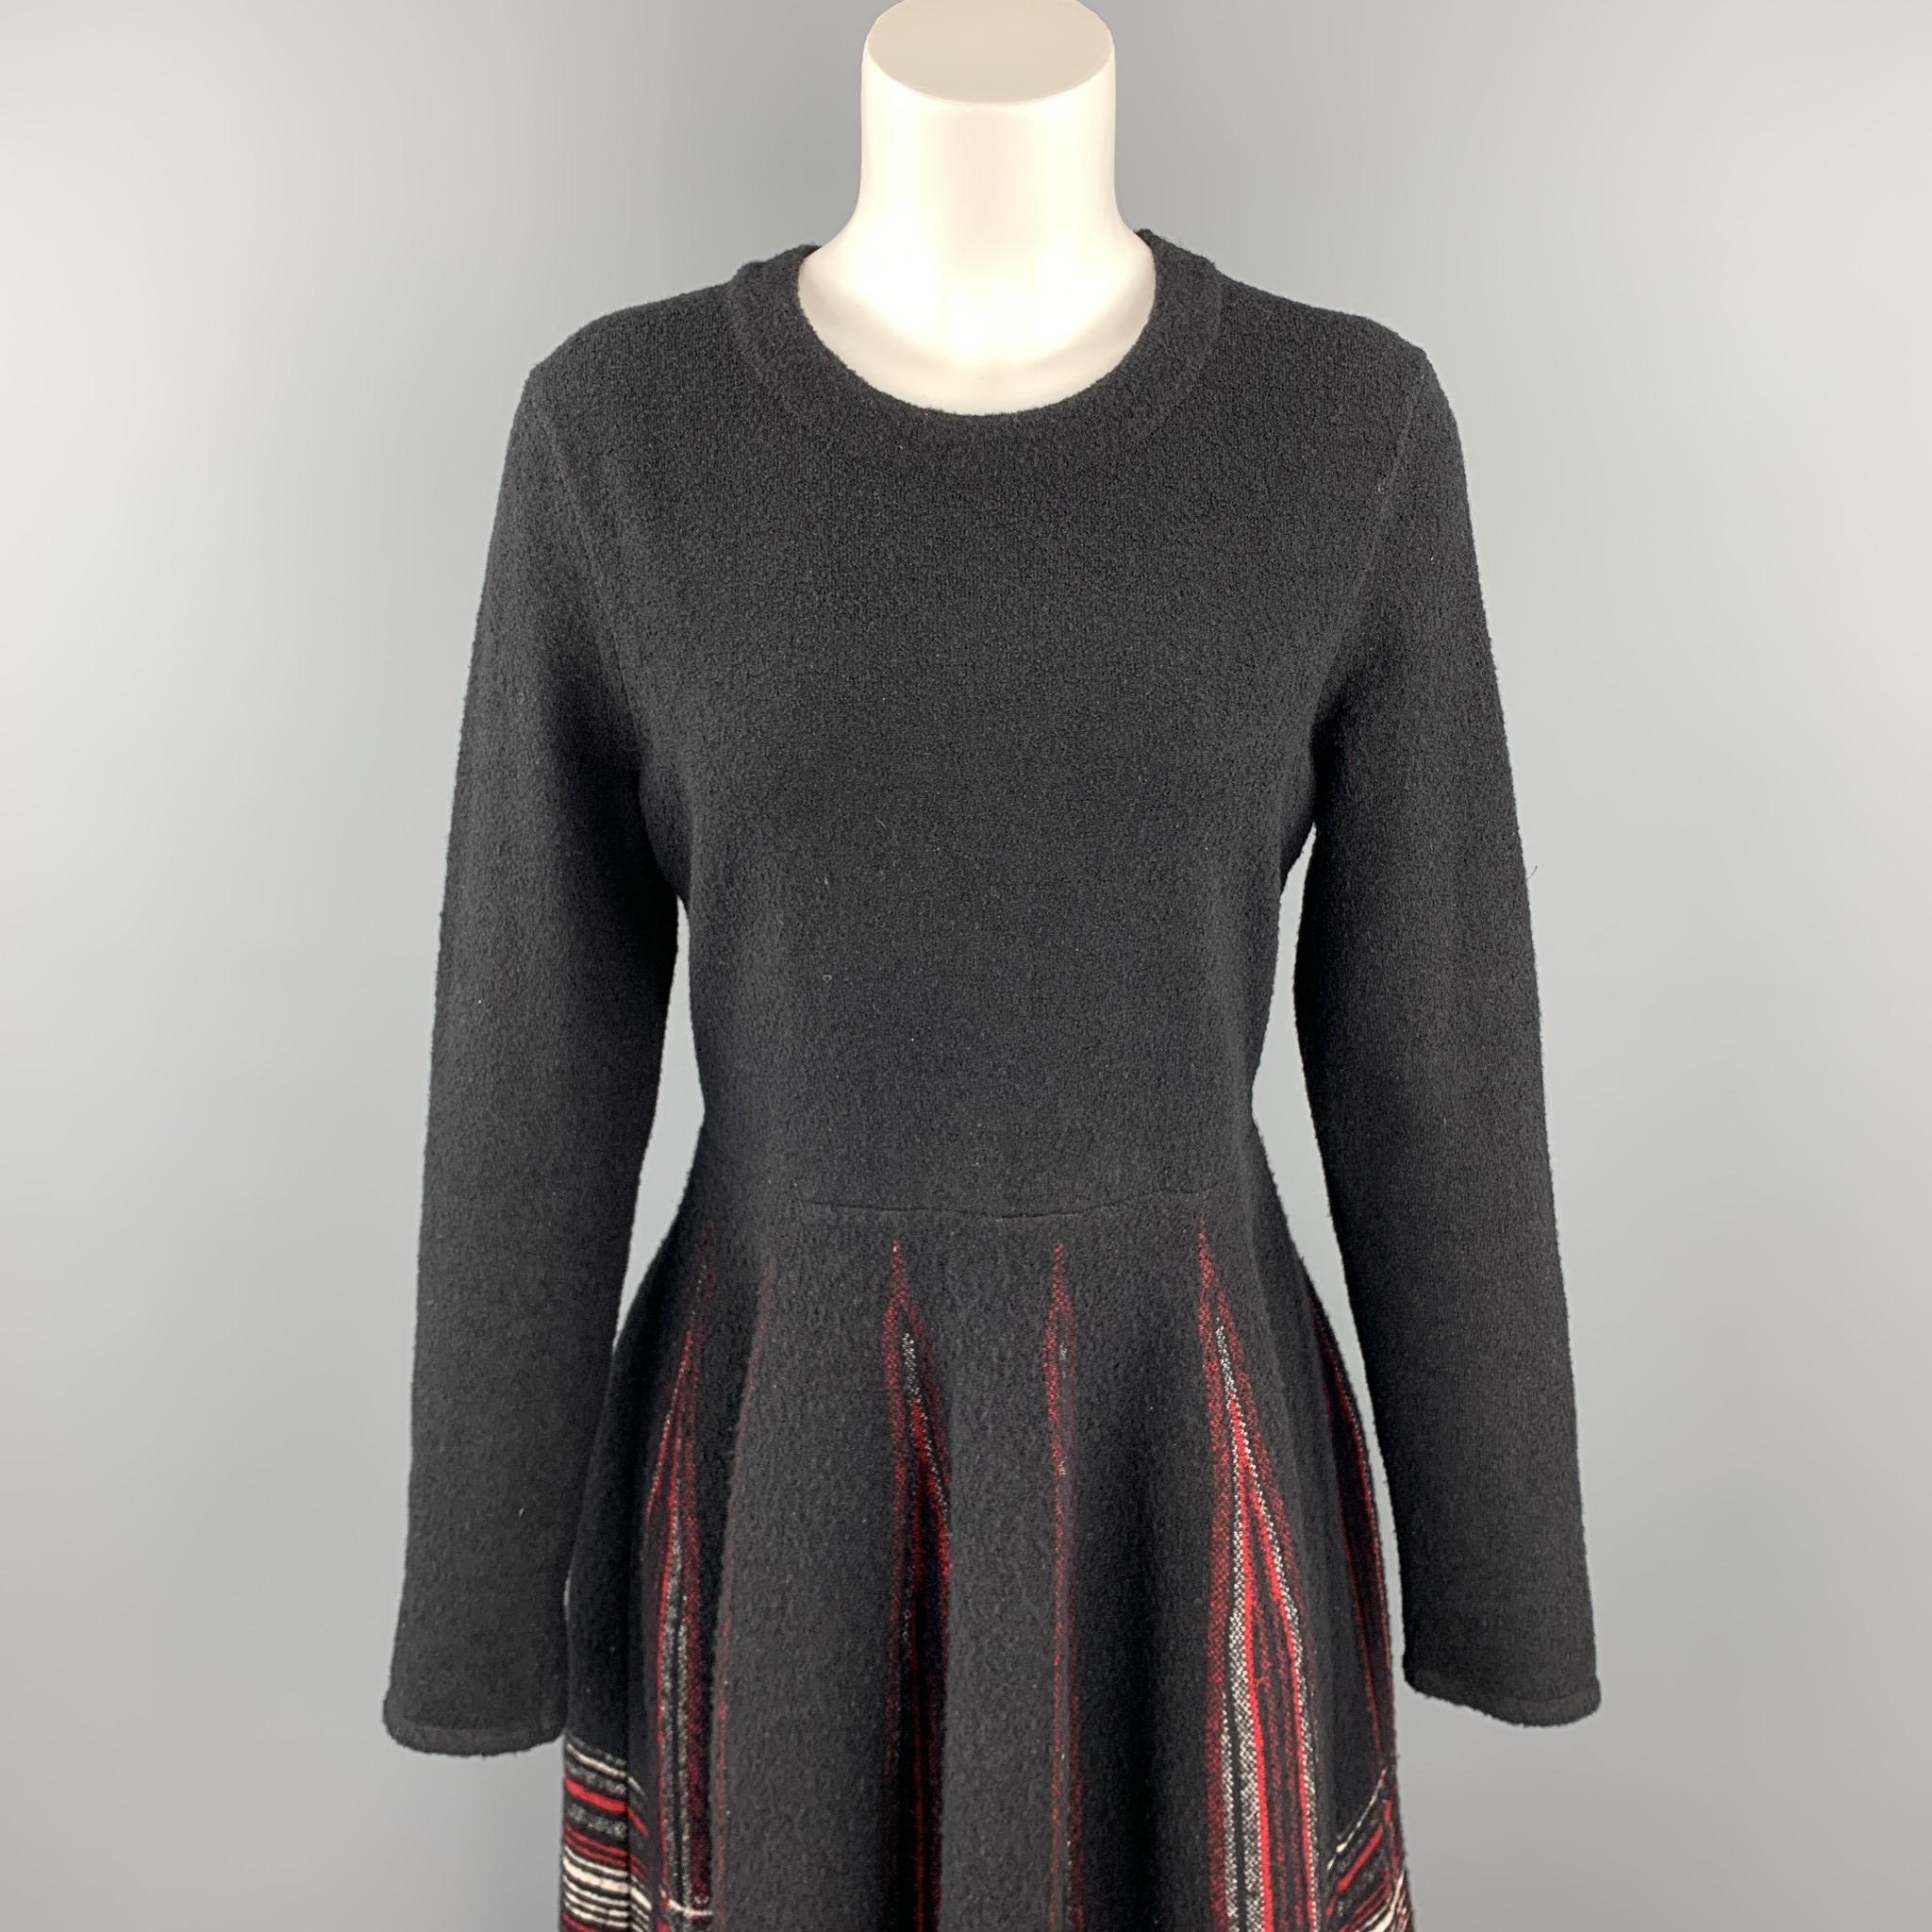 M MISSONI dress comes in a black & red knitted plaid polyamide blend featuring long sleeves and an a-line skirt. Made in Italy.

Good Pre-Owned Condition.
Marked: IT 46

Measurements:

Shoulder: 16.5 in. 
Bust: 35 in. 
Waist: 32 in. 
Hip: 50 in.